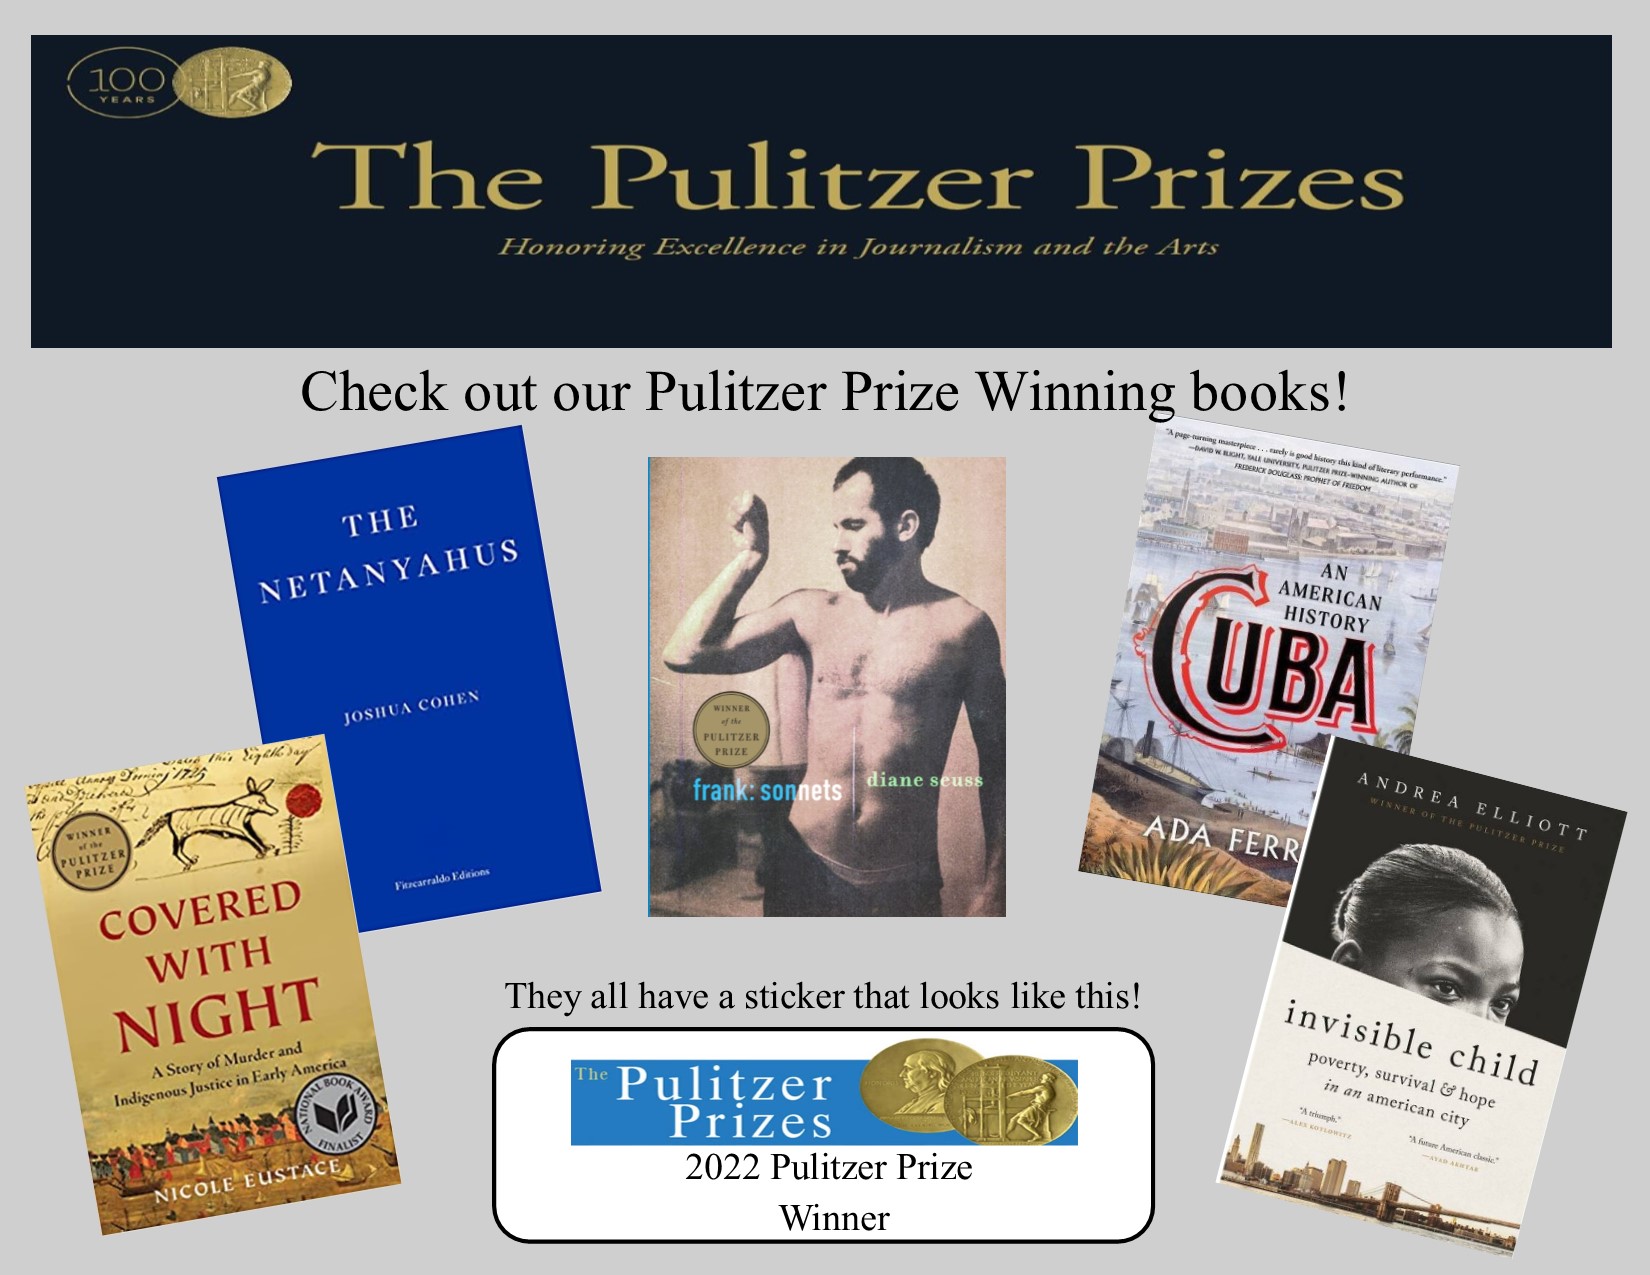 Poster showing this years Pulitzer Prize Winners